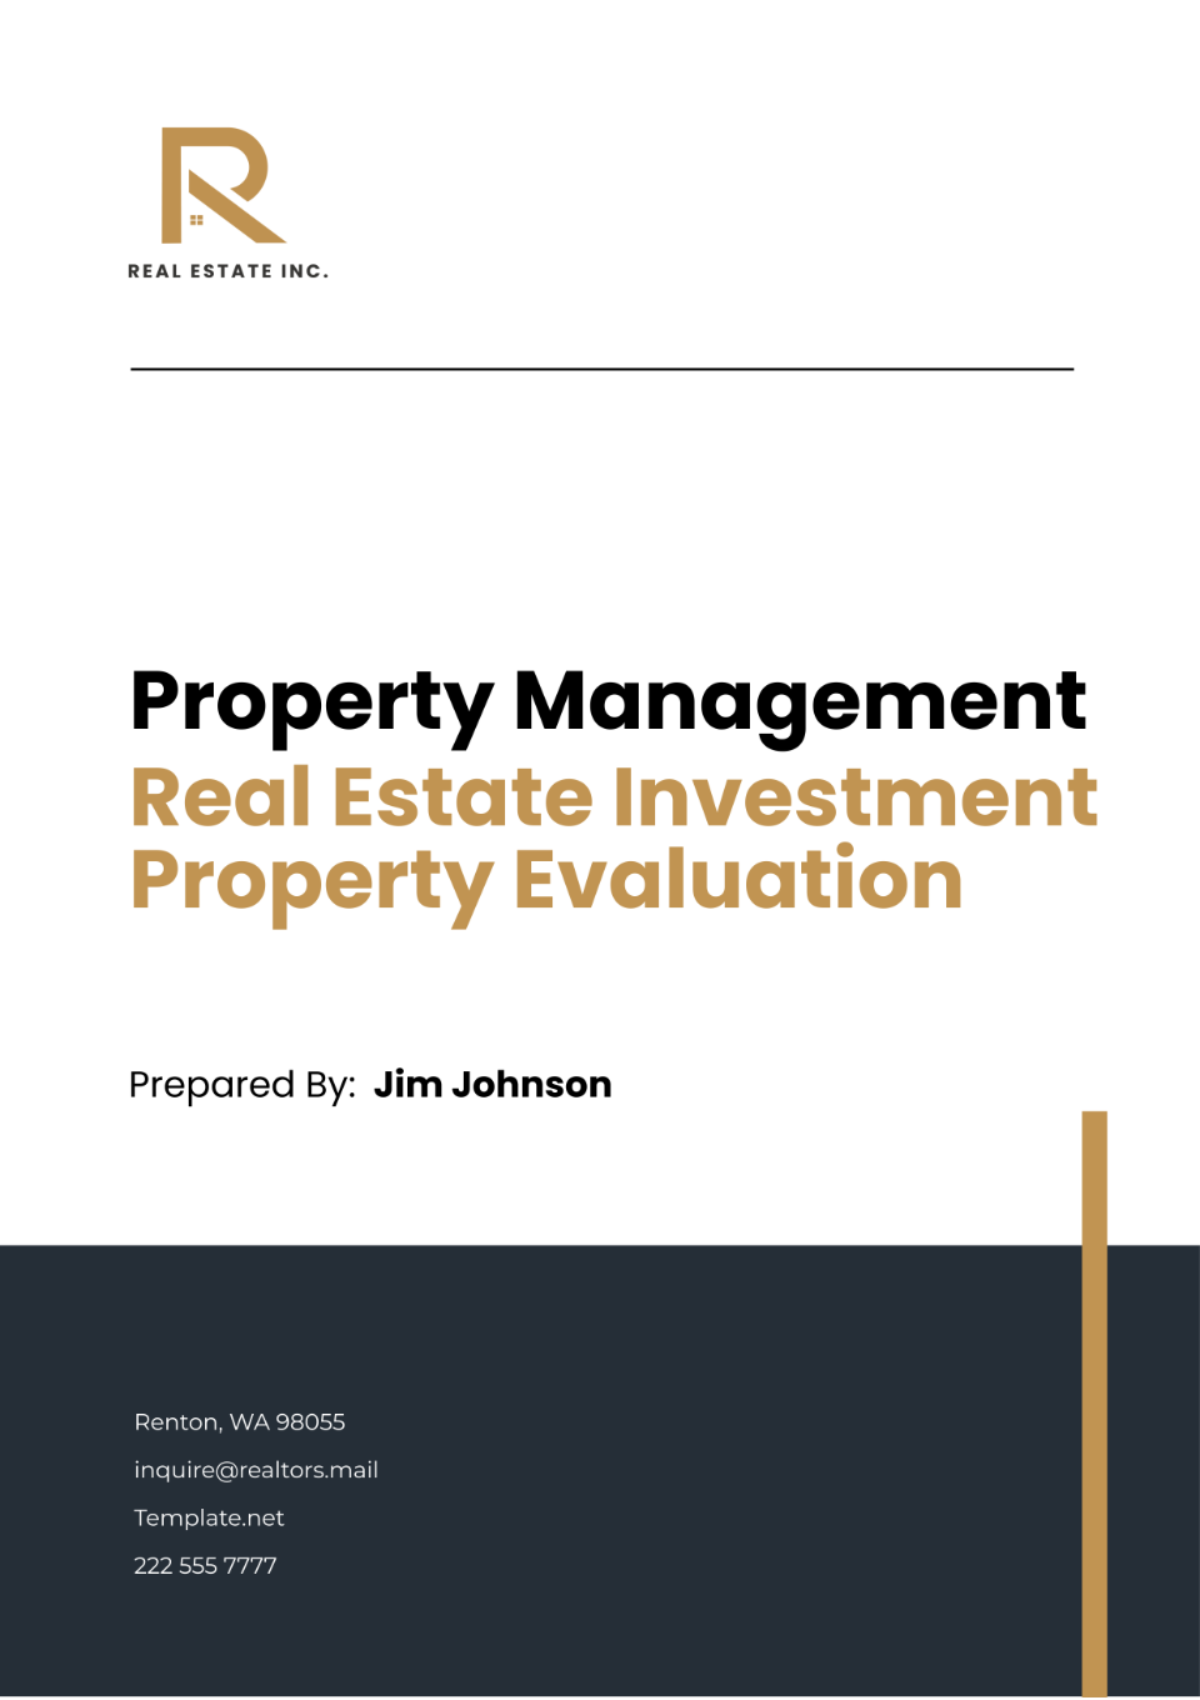 Free Real Estate Investment Property Evaluation Template